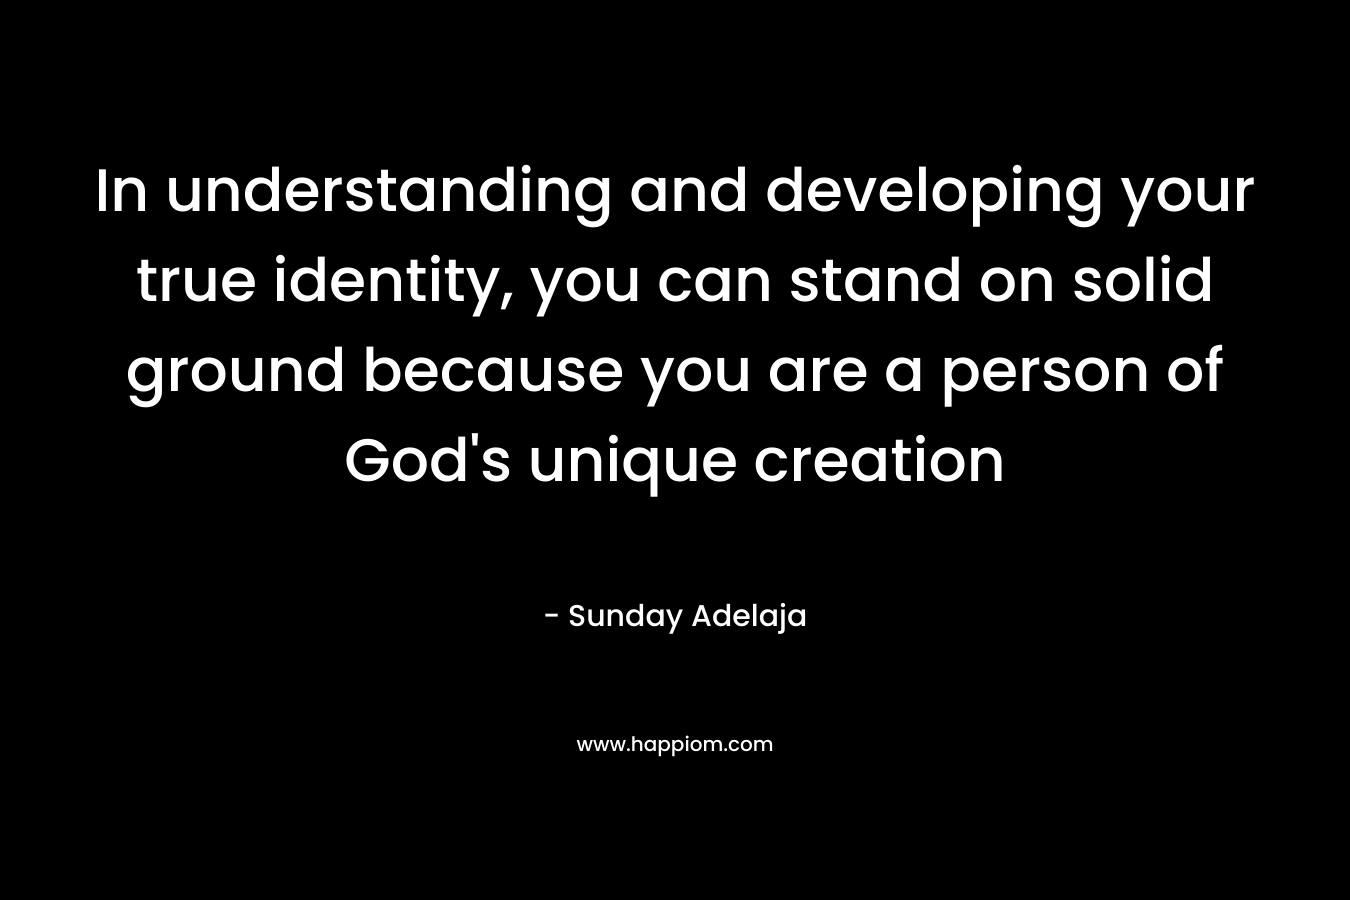 In understanding and developing your true identity, you can stand on solid ground because you are a person of God's unique creation